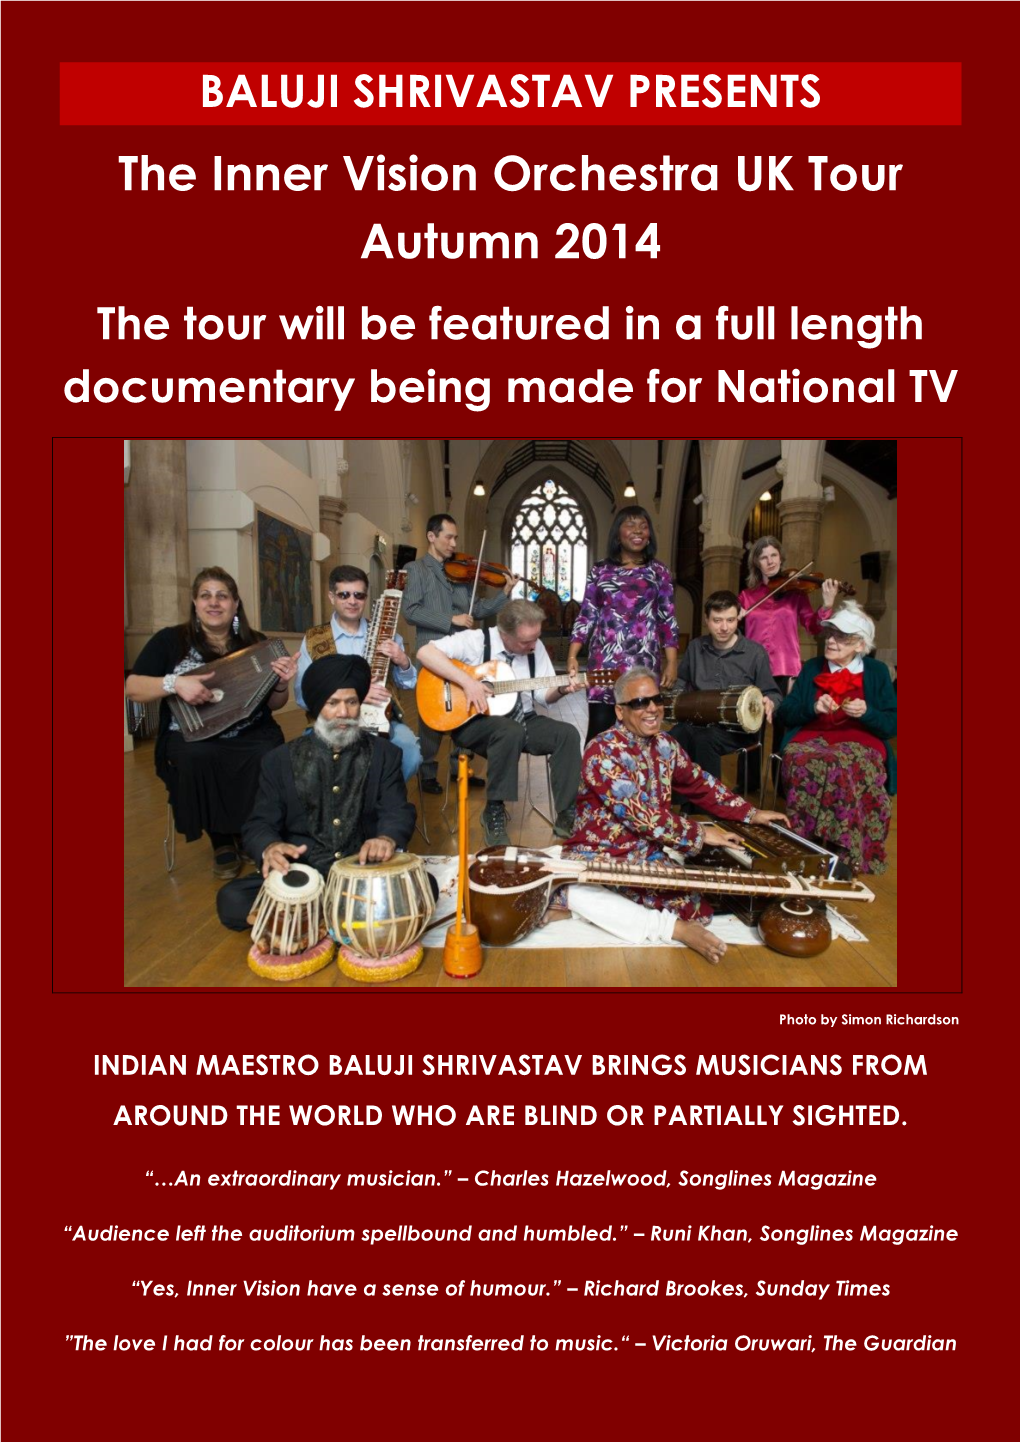 The Inner Vision Orchestra UK Tour Autumn 2014 the Tour Will Be Featured in a Full Length Documentary Being Made for National TV